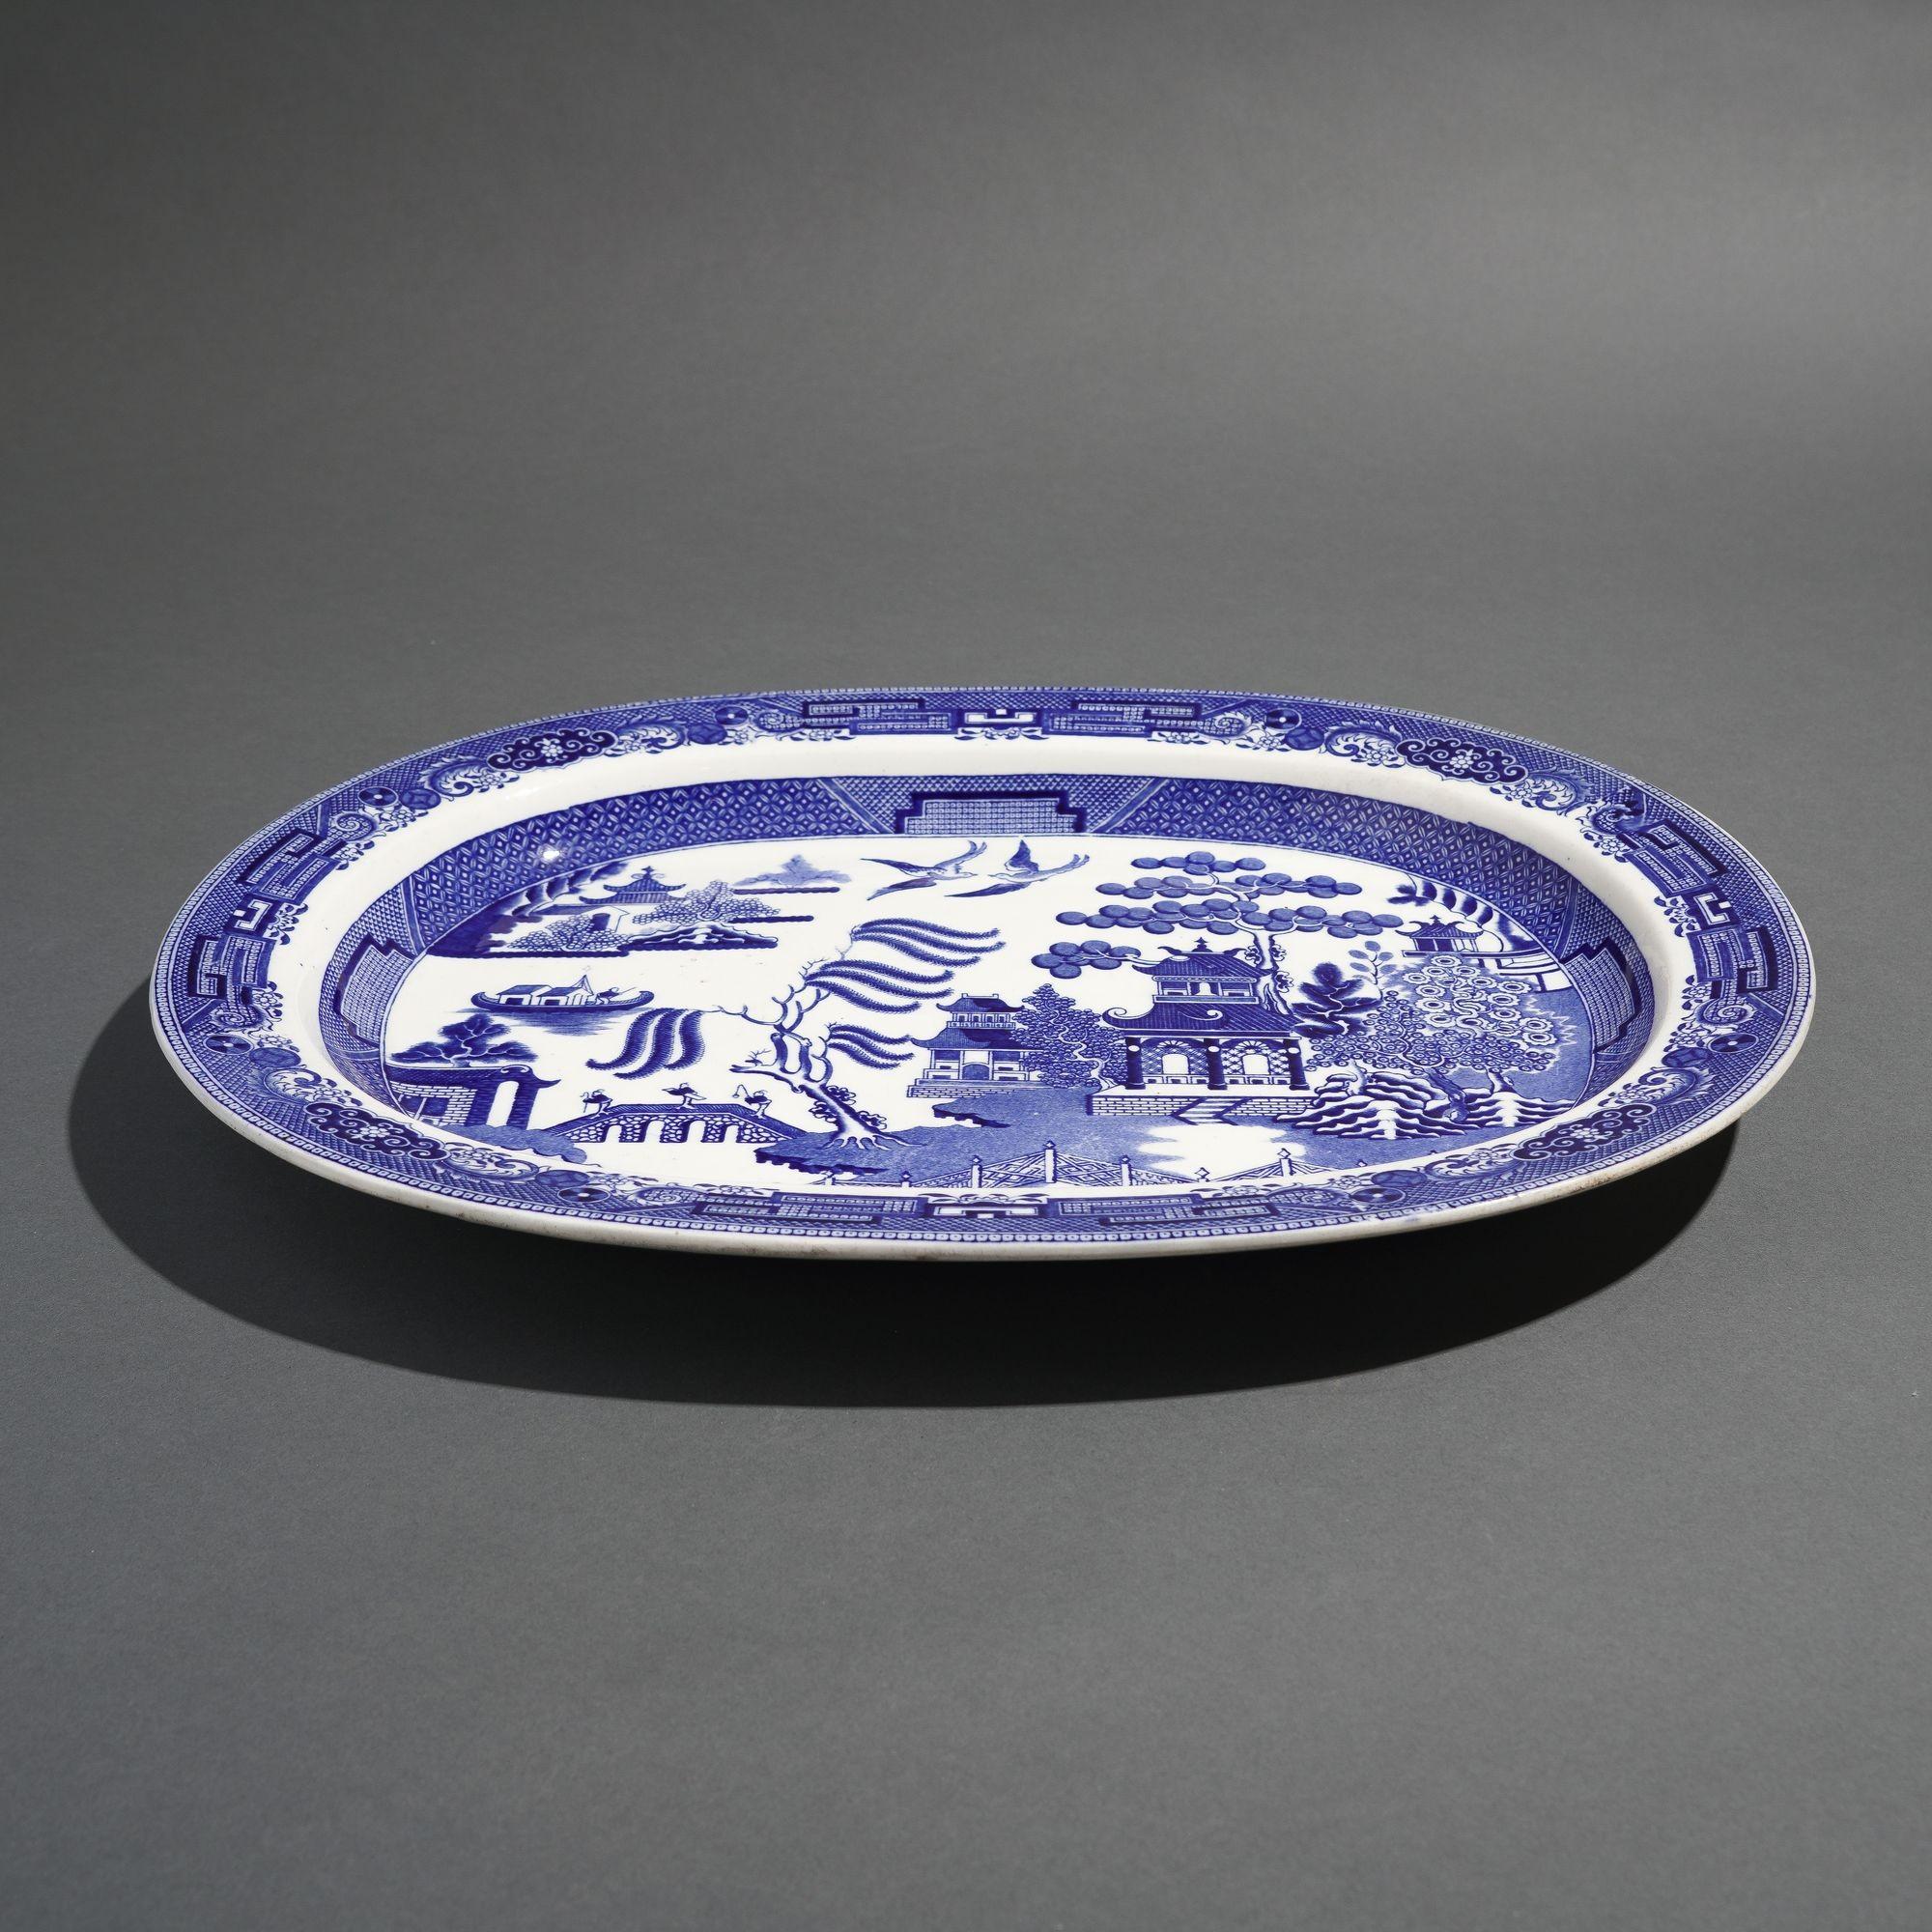 Willow pattern oval platter by Wedgwood, 1891-92 In Good Condition For Sale In Kenilworth, IL